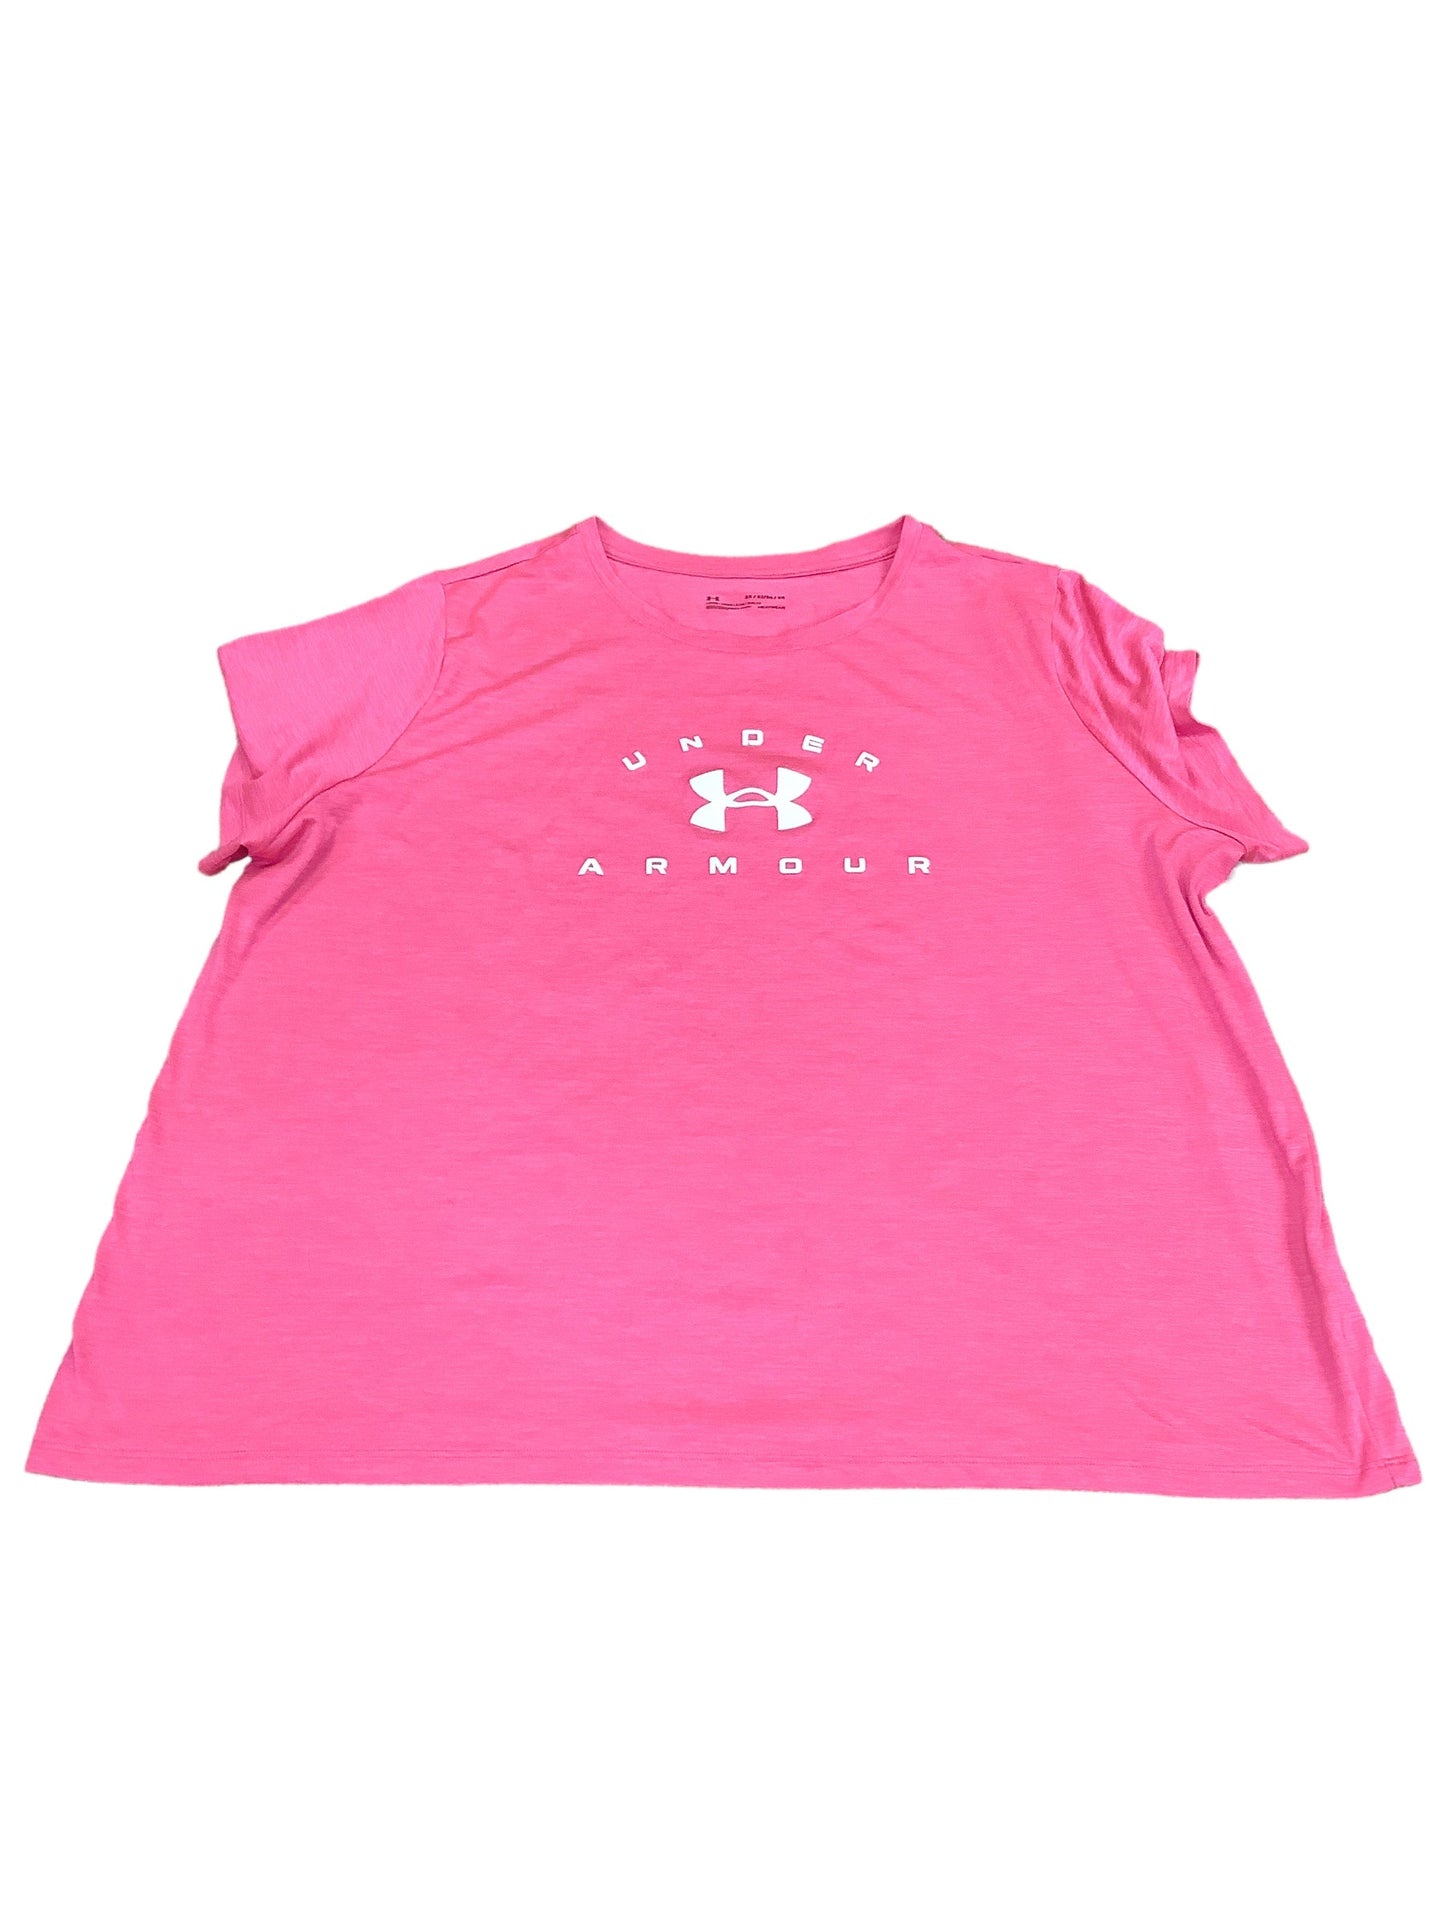 Athletic Top Short Sleeve By Under Armour  Size: 26